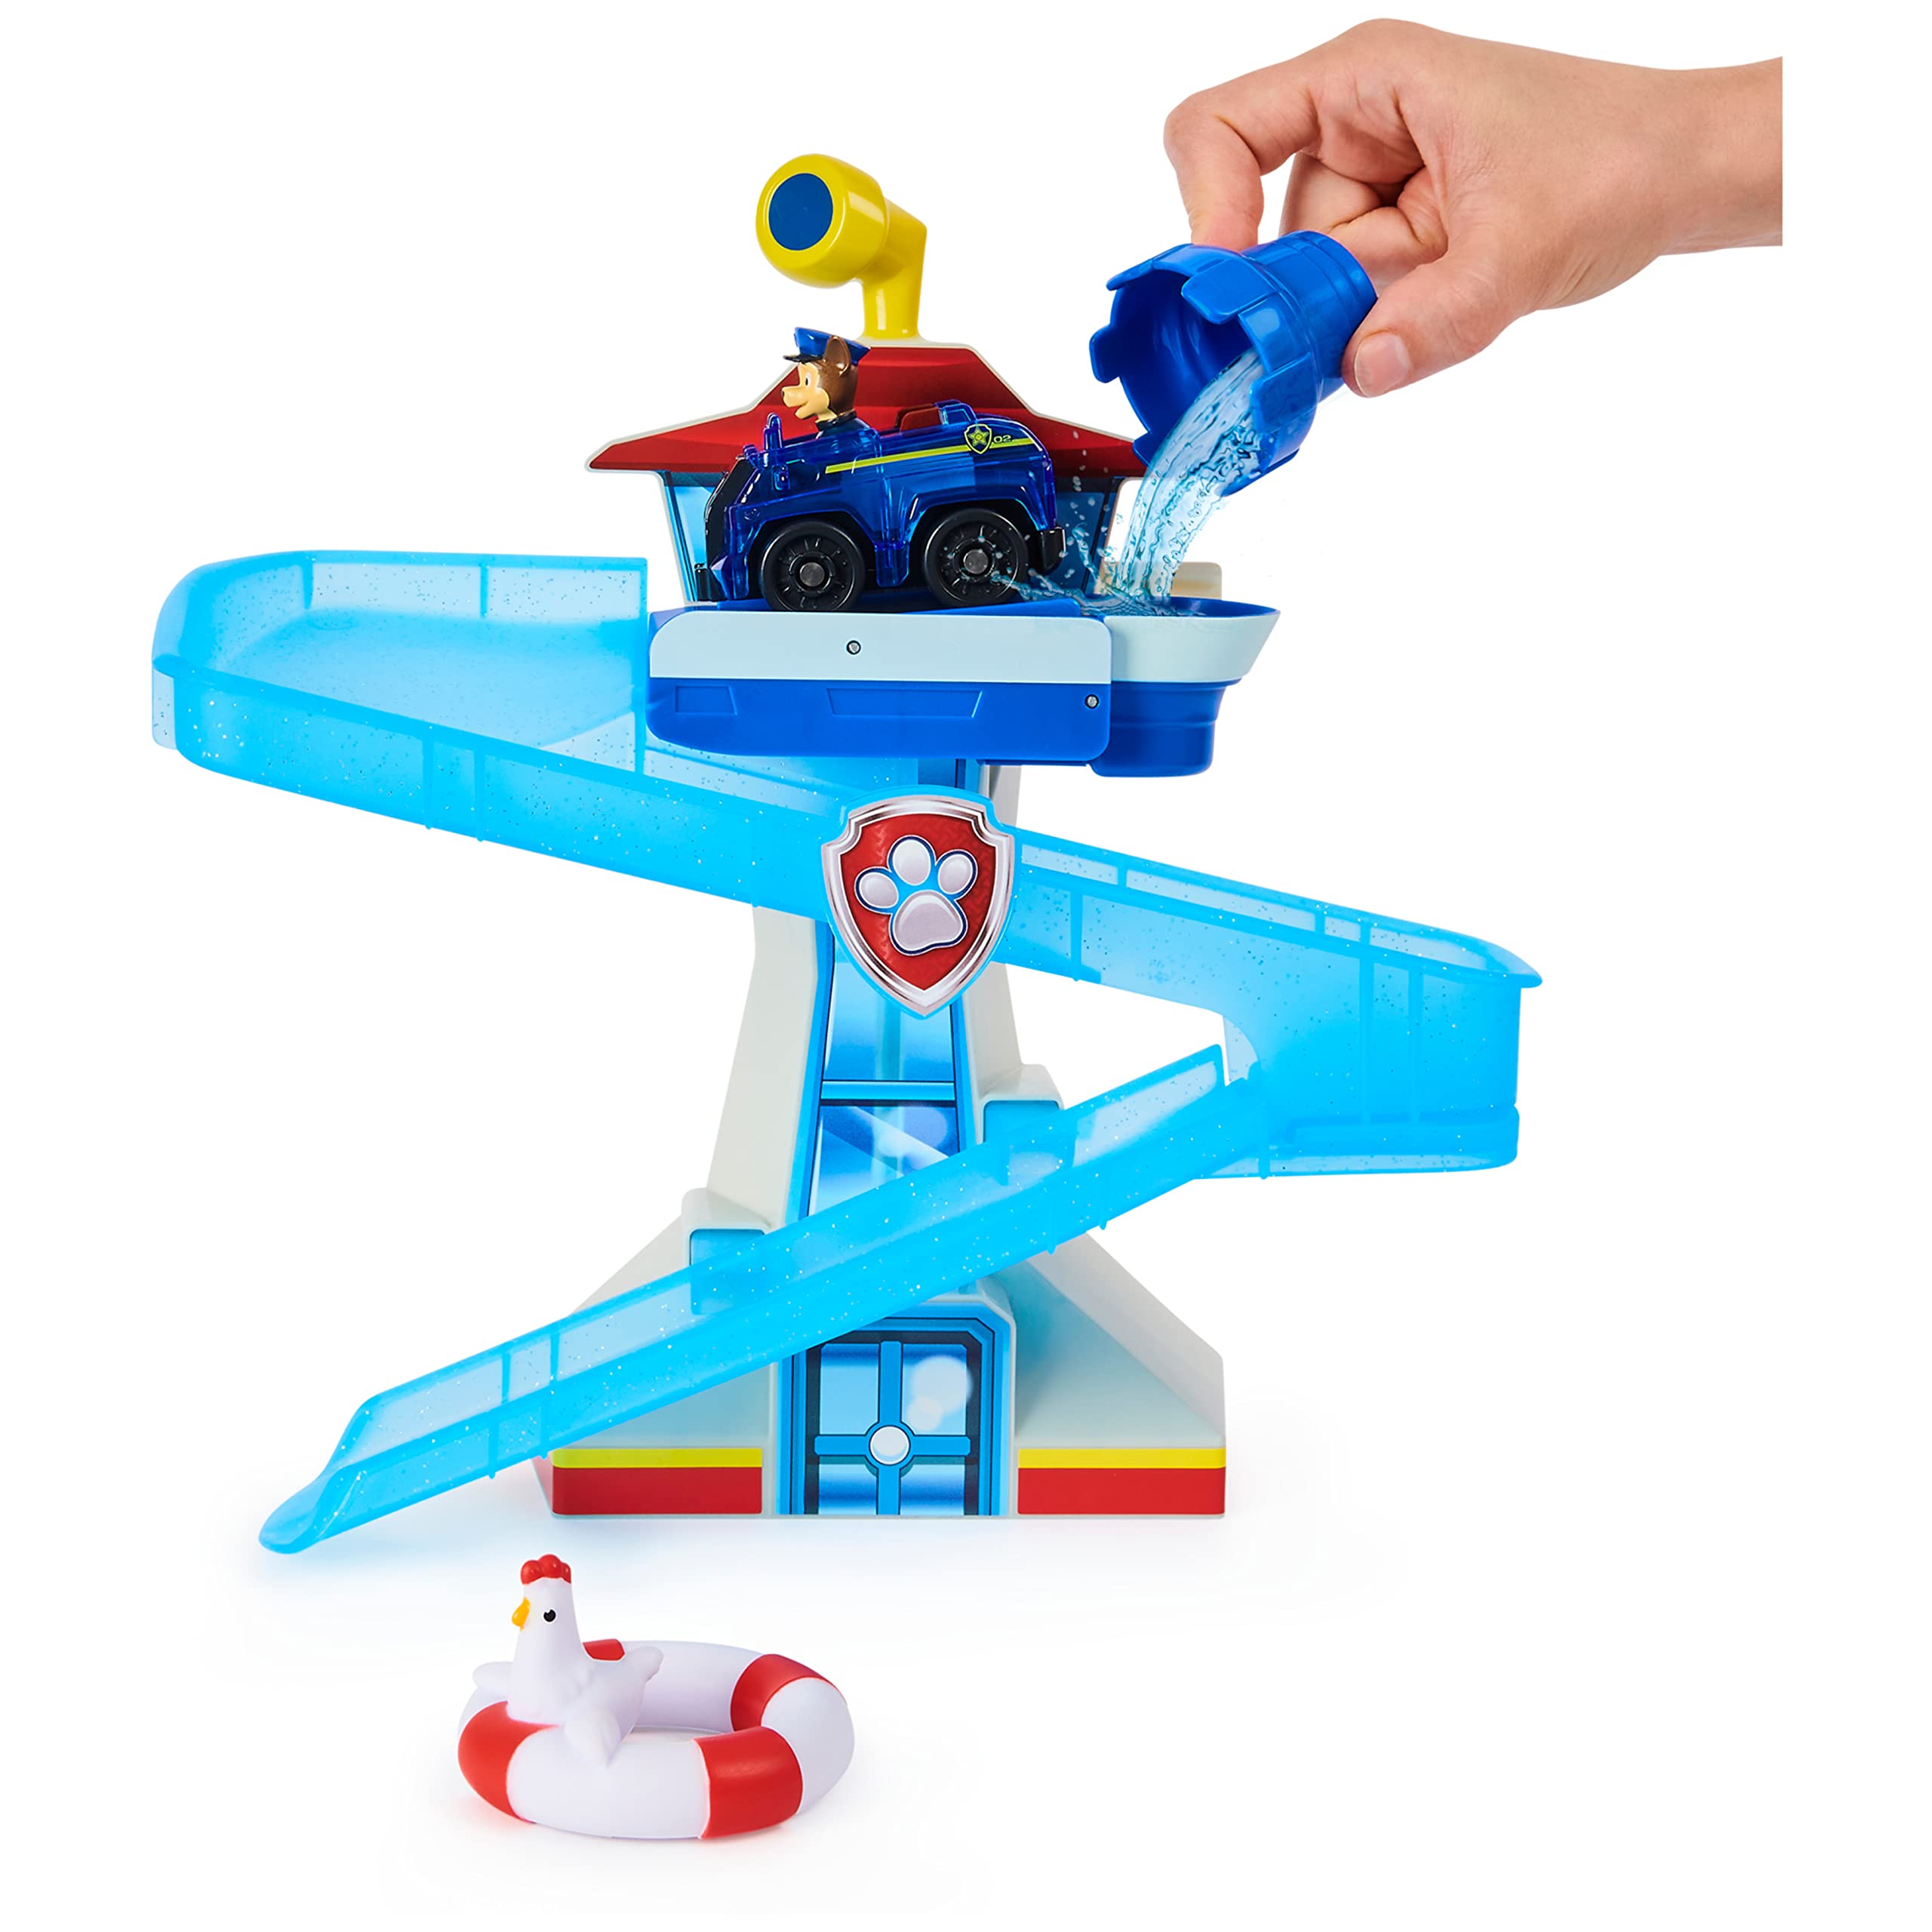 Paw Patrol, Adventure Bay Bath Playset with Light-up Chase Vehicle, Bath Toy for Kids Aged 3 and up